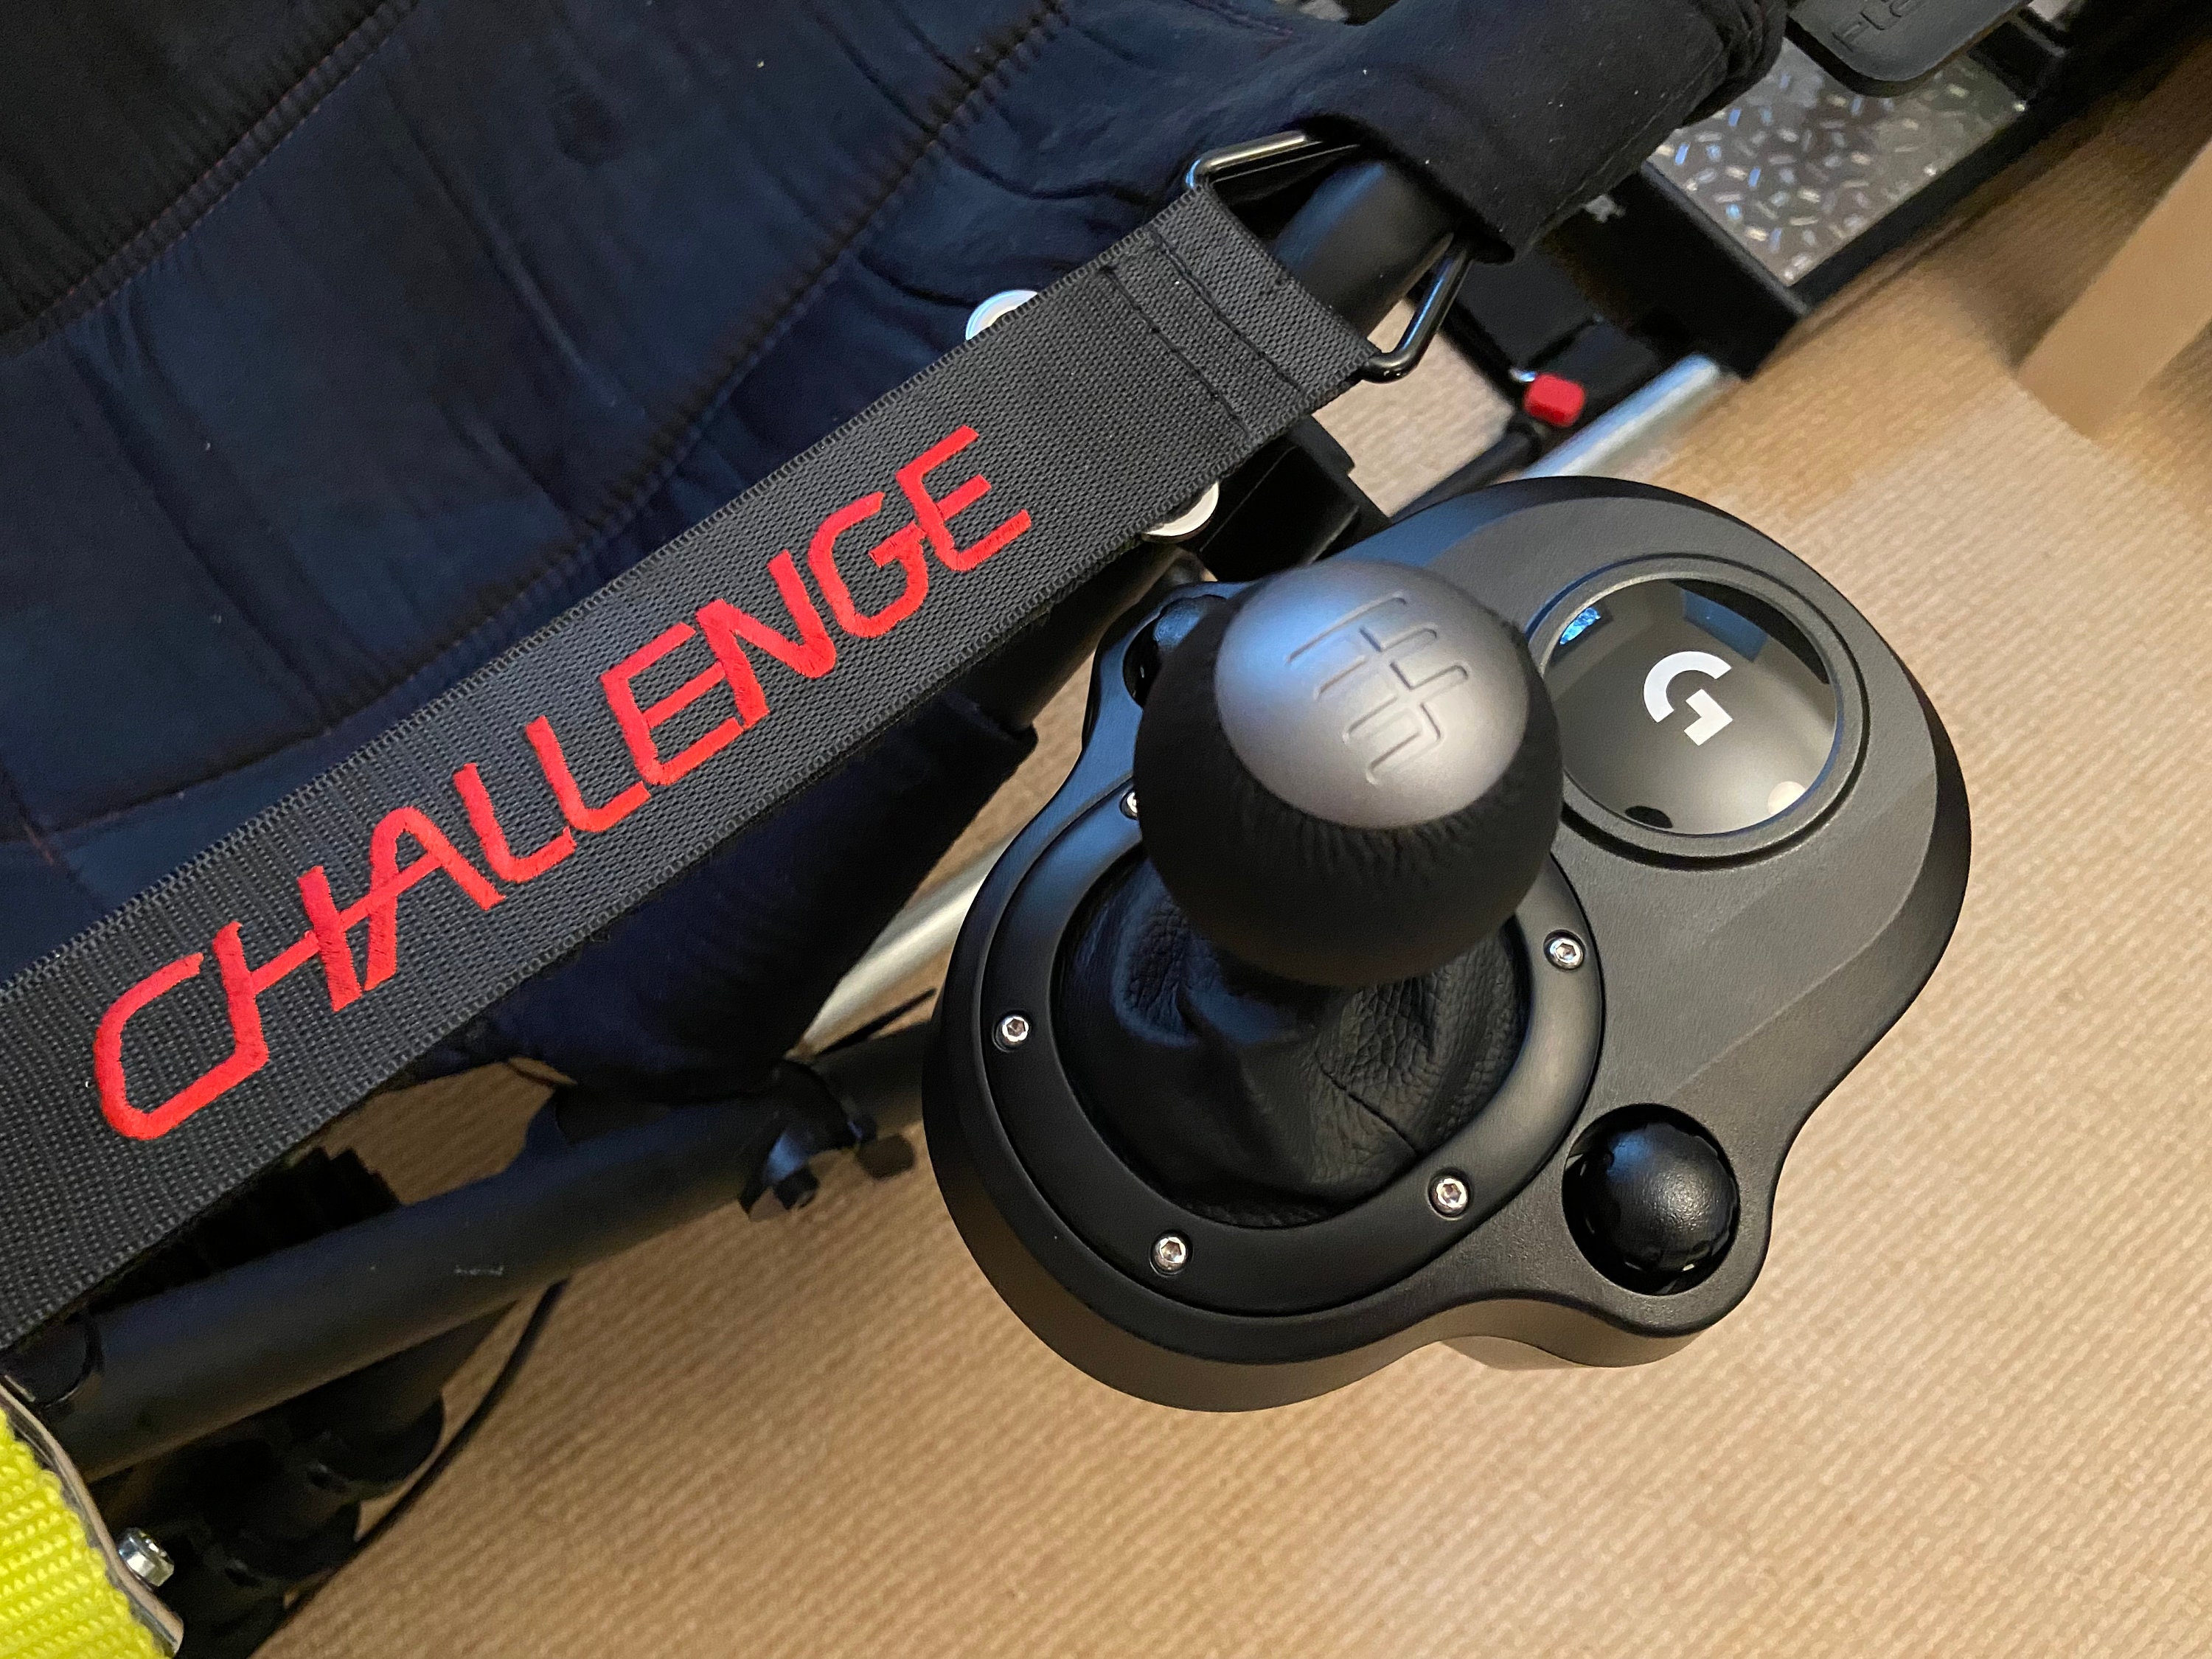 Trustmaster T300RS and Logitech G29 pedal to Playseat challenge